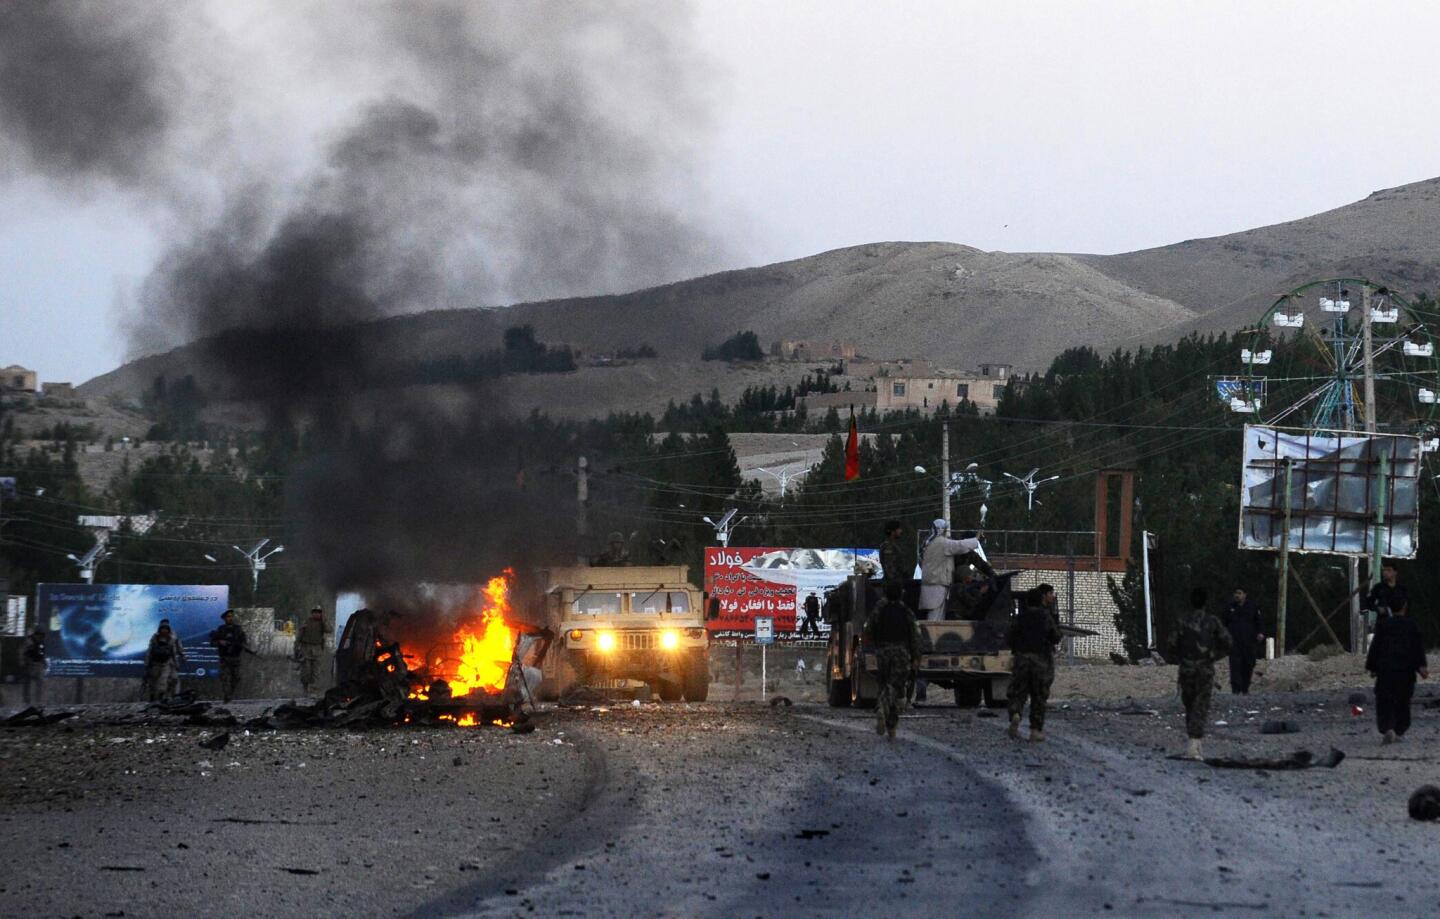 Smoke rises from a burning vehicle near the U.S. Consulate after an attack by a car bomb followed by a gunfight in Herat, Afghanistan. Seven heavily armed Taliban suicide attackers struck the consulate before dawn, setting off two car bombs and sparking a shootout with U.S. forces.